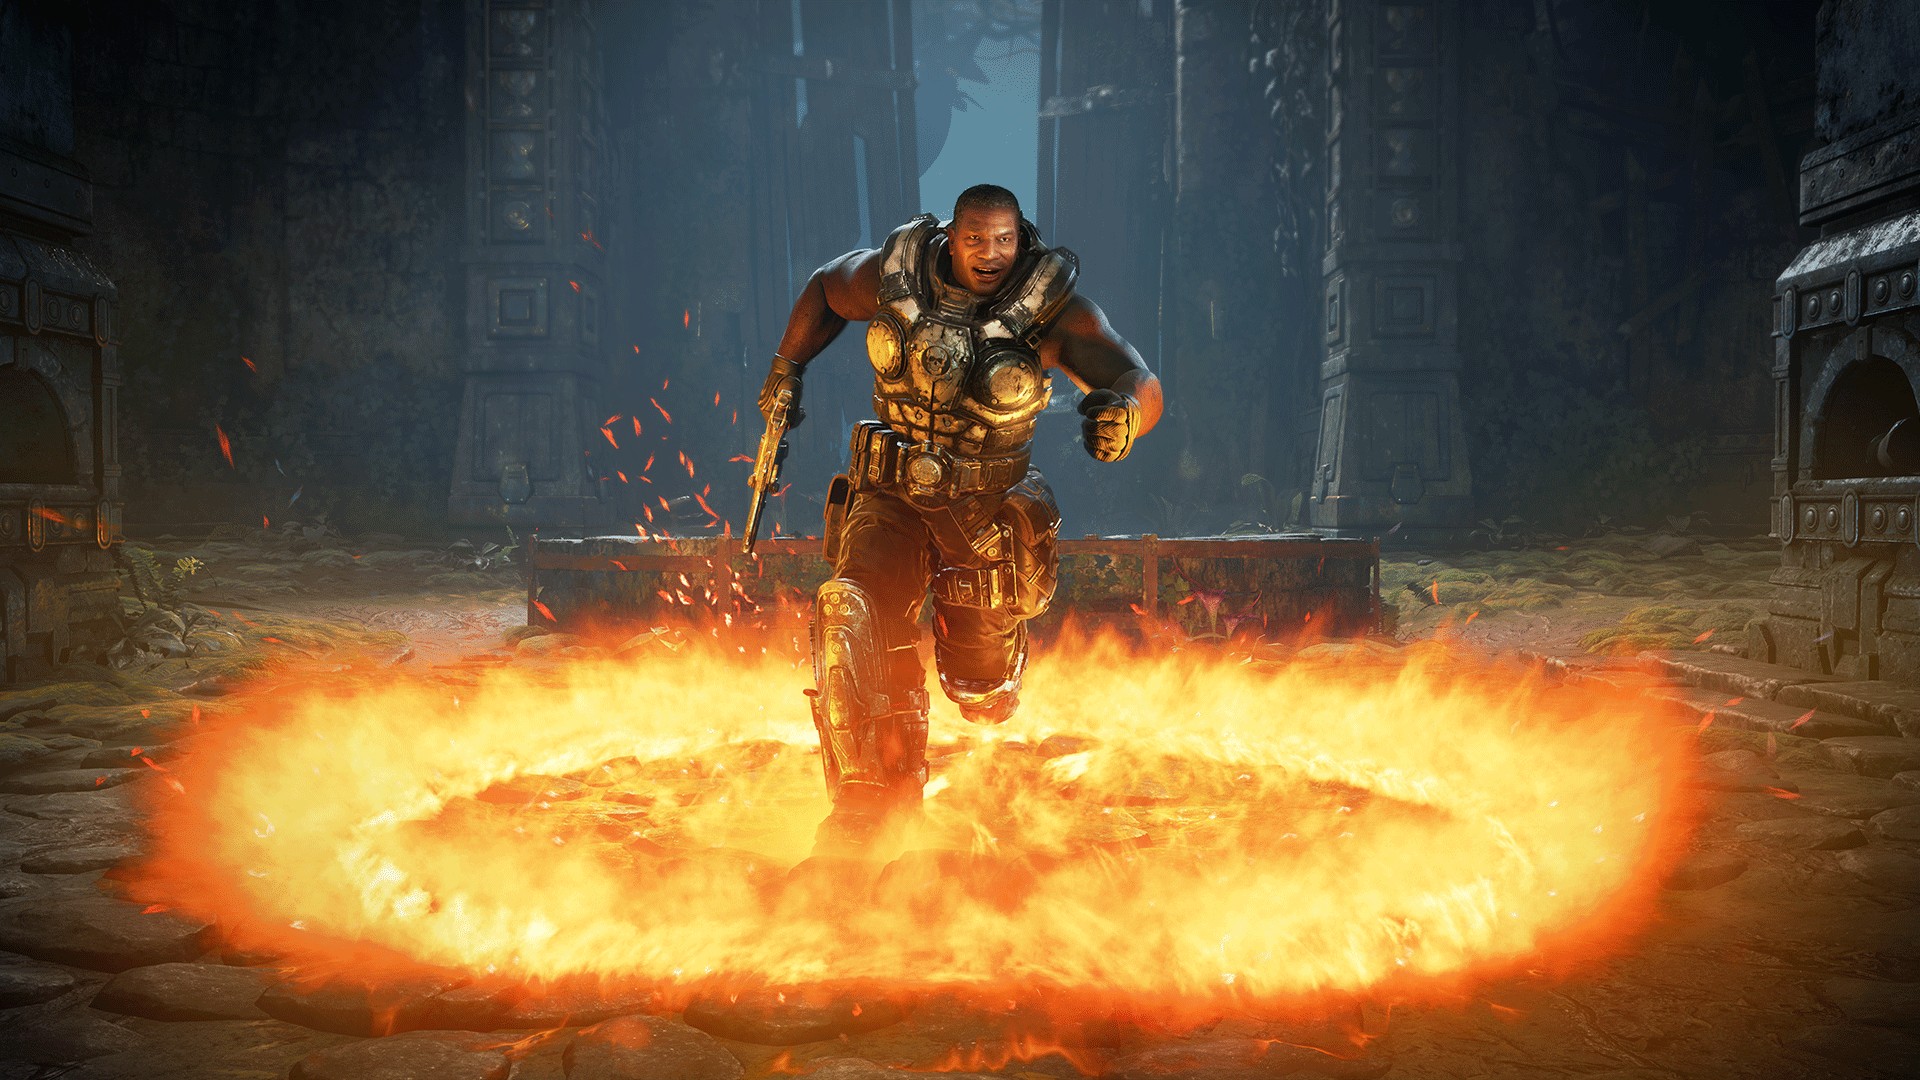 The max level cap in Gears 5 multiplayer